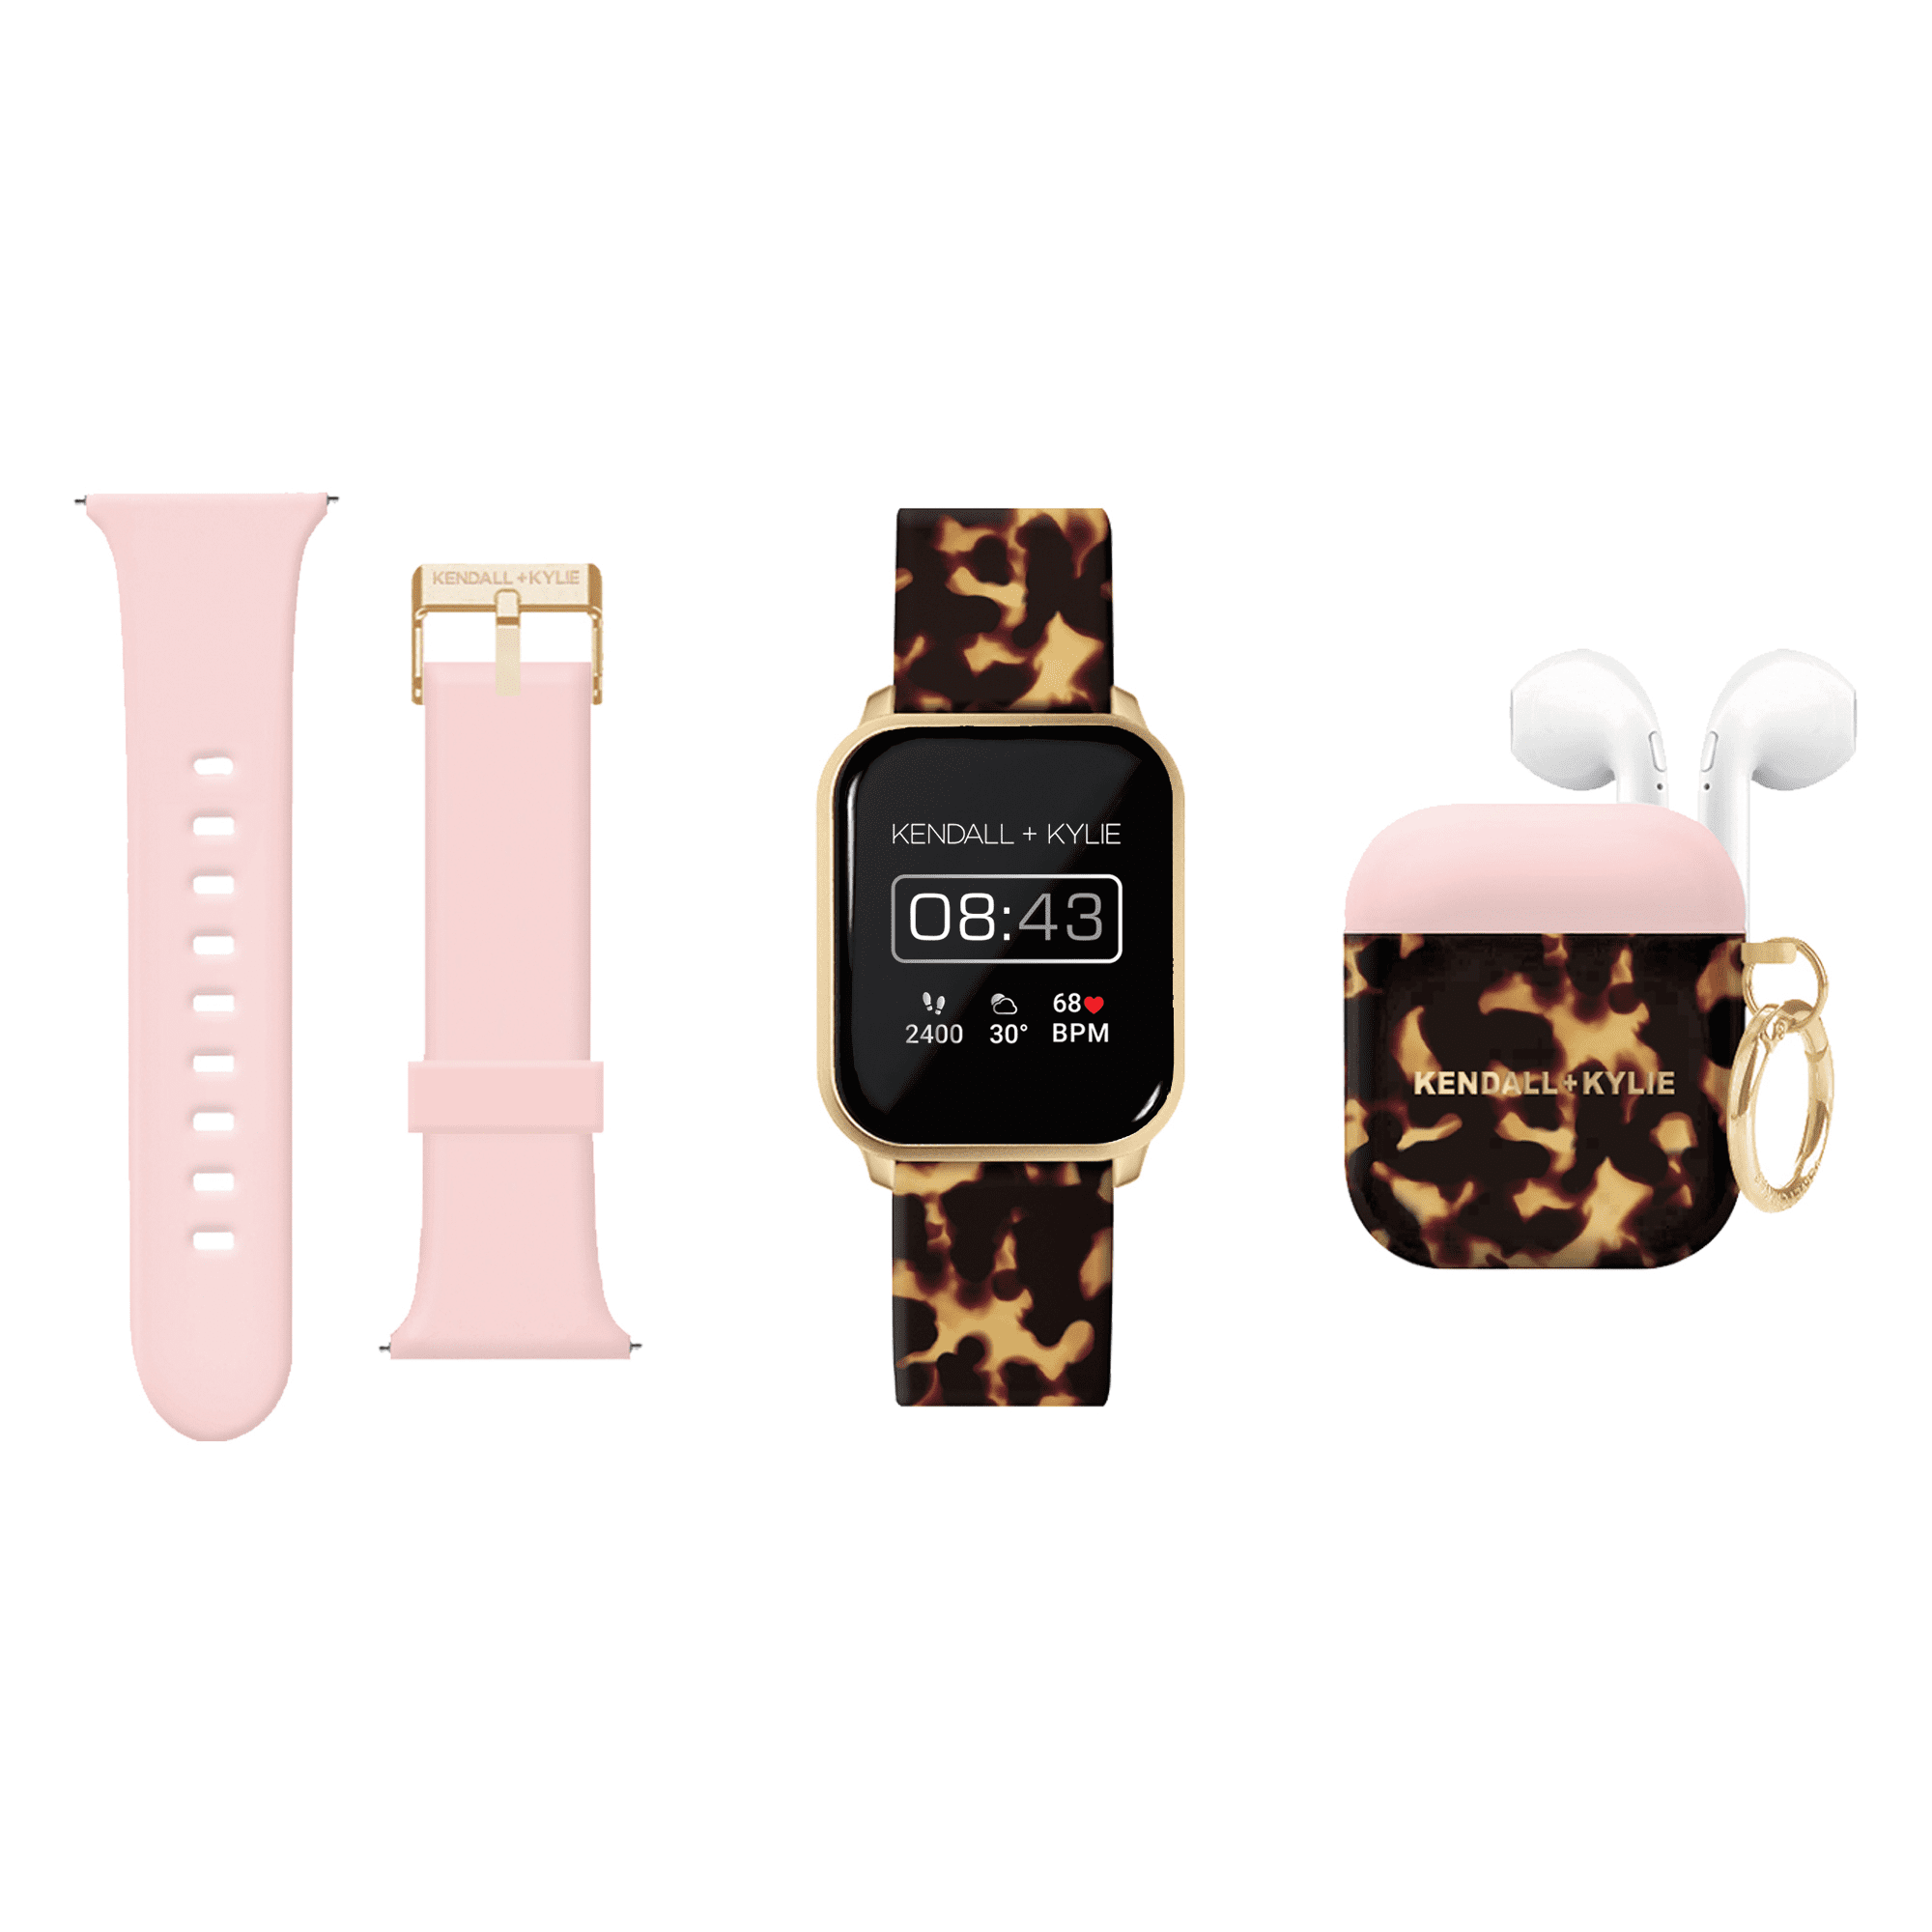 Kendall + Kylie Black/Gold Smart Watch with Interchangeable Strap, Earbud  Set and Keychain Case 